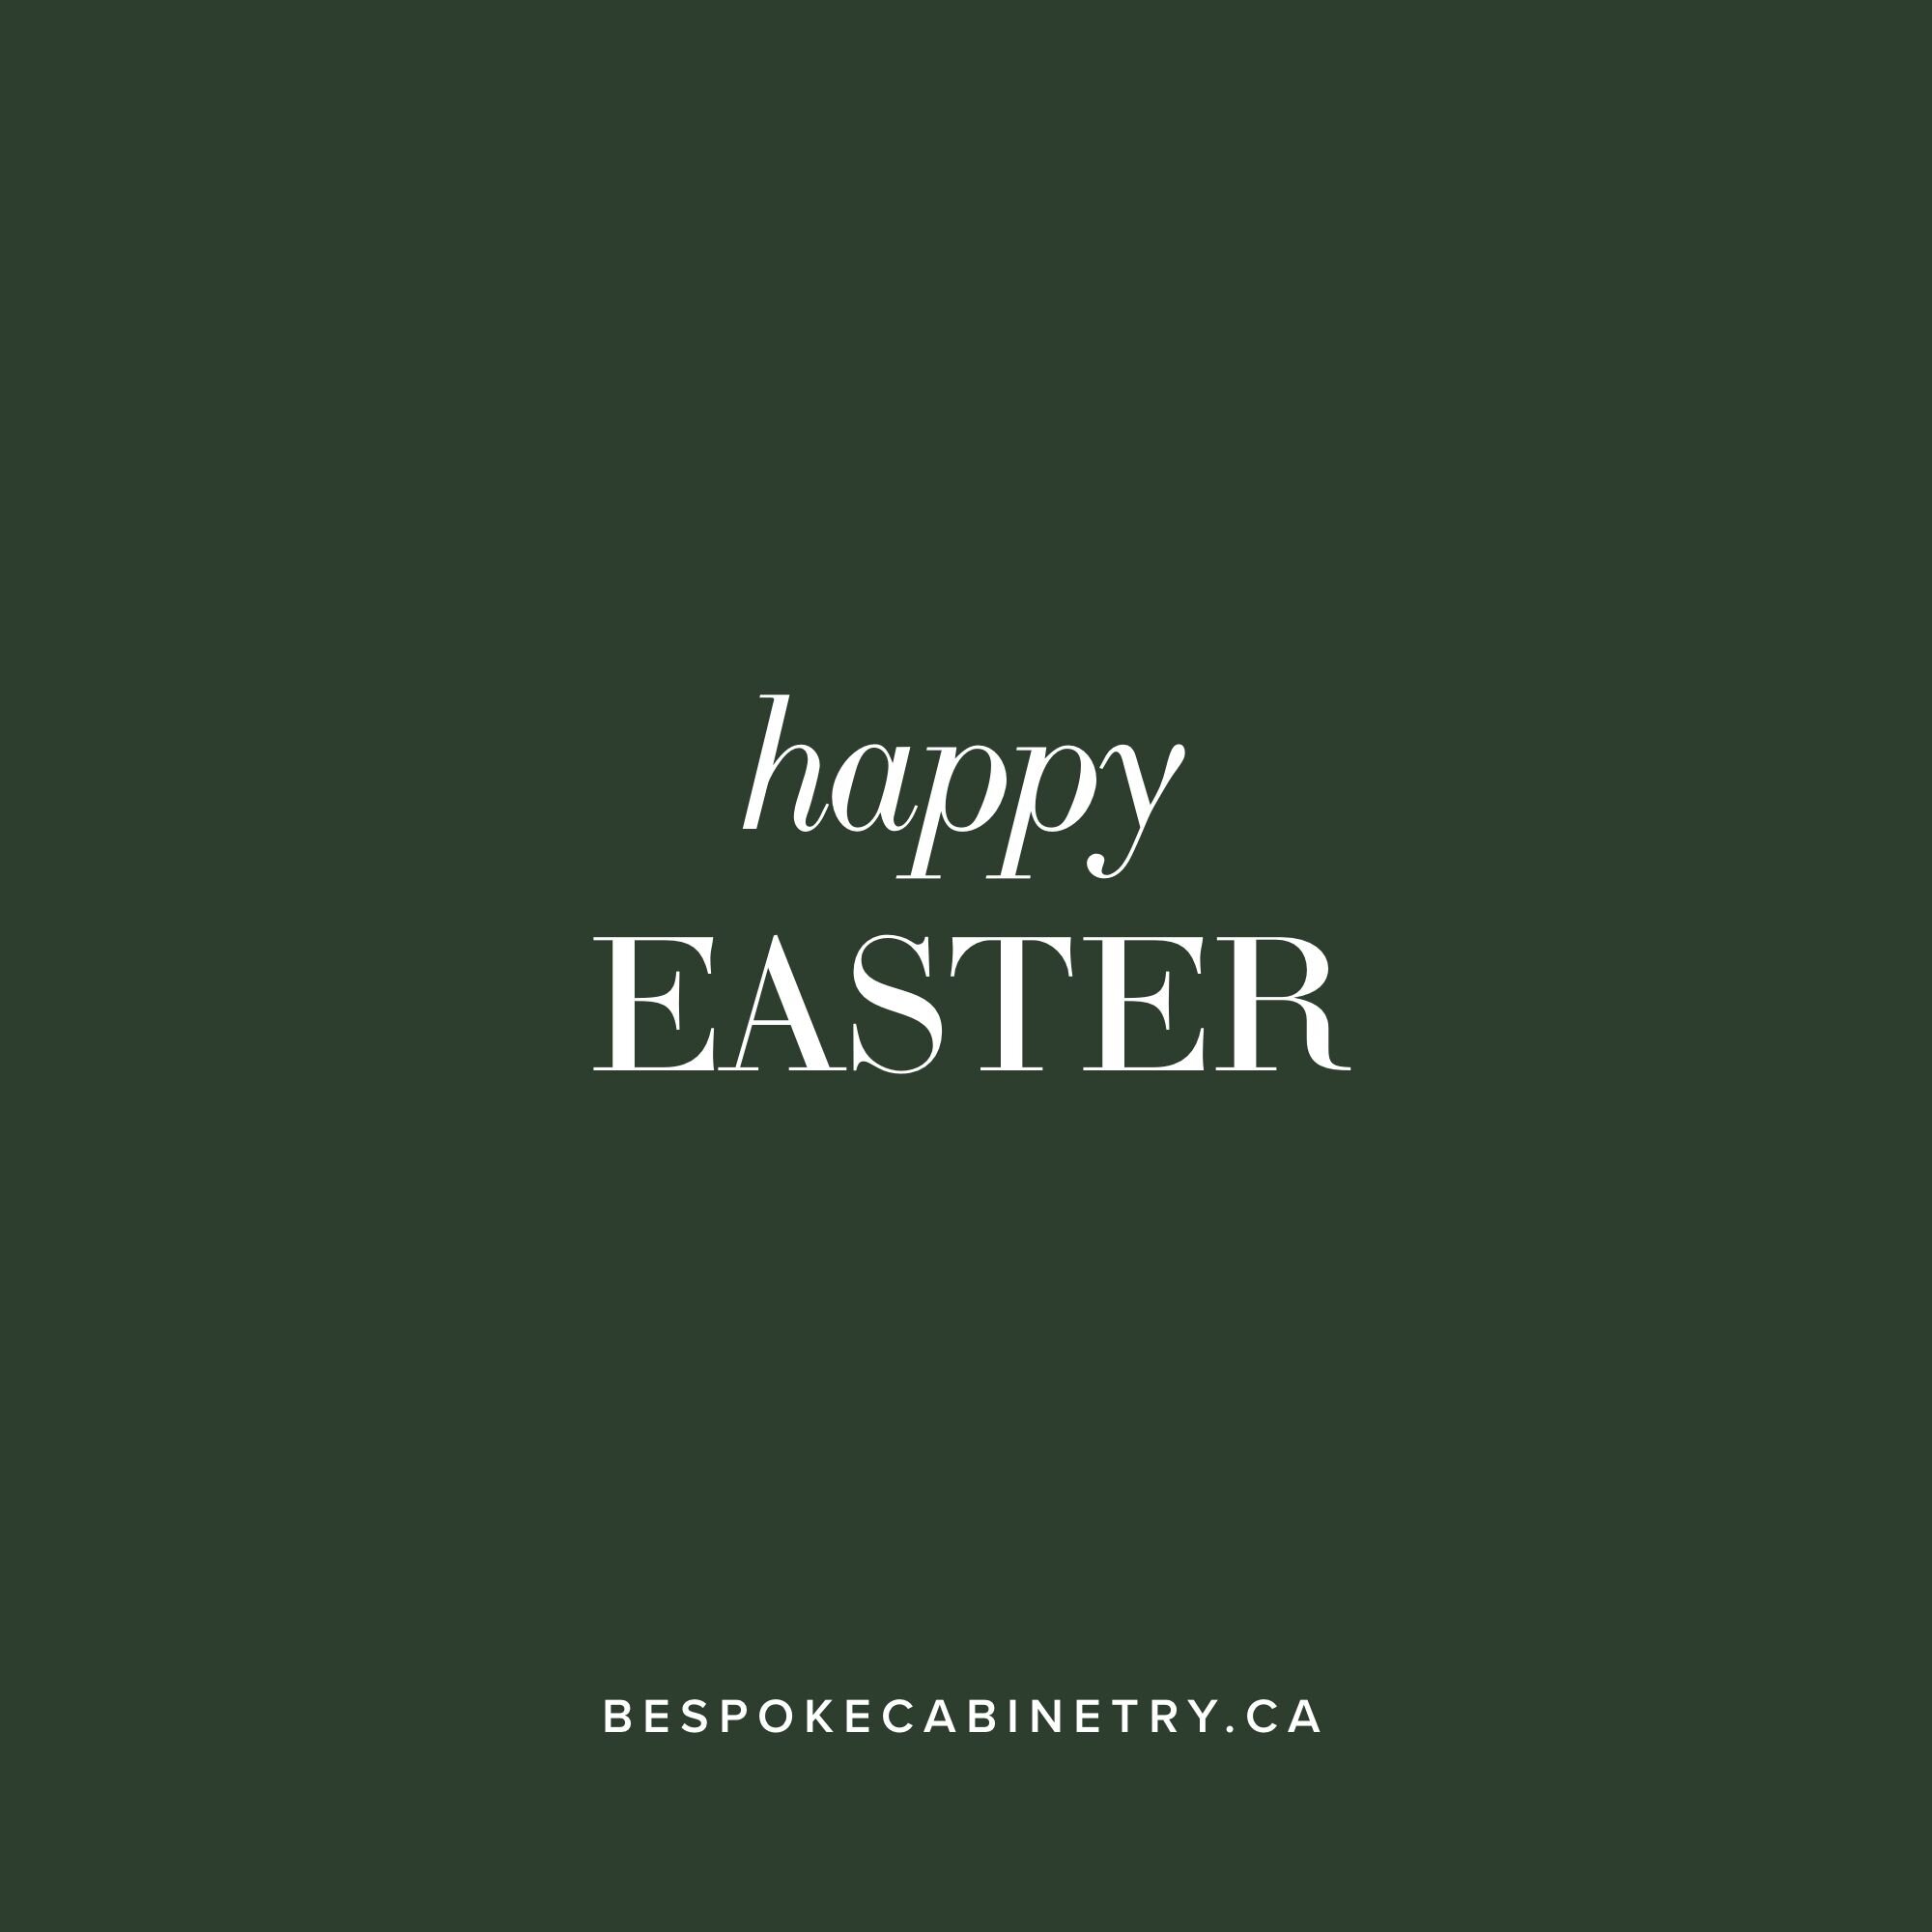 Ⓑ &mdash;EASTER WISHES
May your homes be filled with colourful blooms, charming decor, and a touch of springtime magic. Let's celebrate this special holiday by creating inviting spaces for loved ones to gather and make lasting memories. Happy Easter 